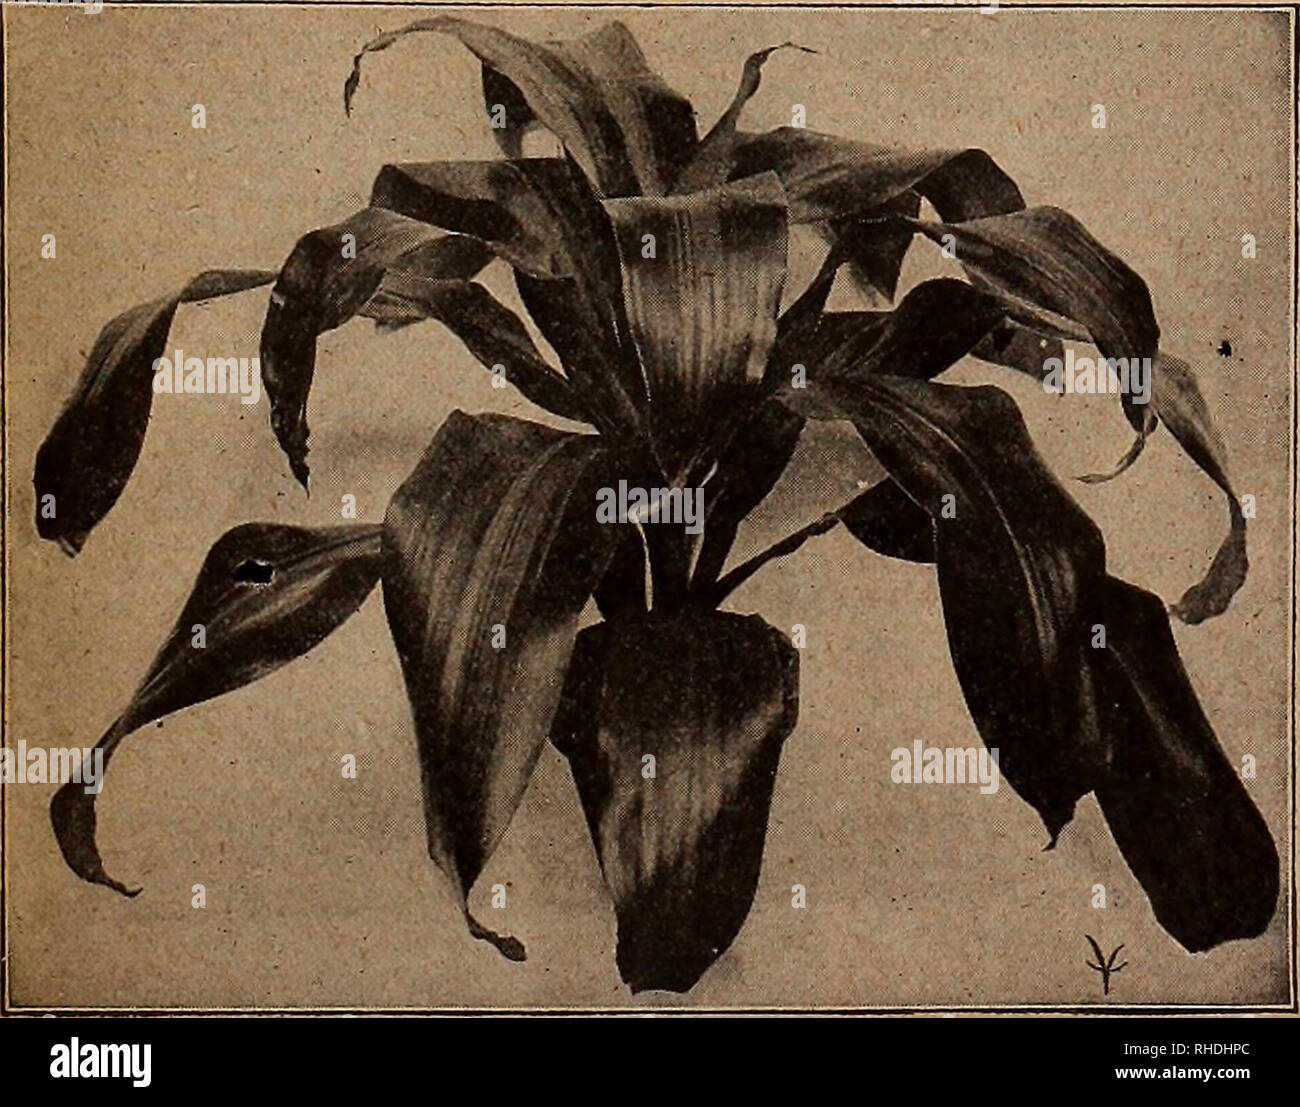 . Book for florists. Flowers Seeds Catalogs; Bulbs (Plants) Seedlings Catalogs; Trees Seeds Catalogs; Horticulture Equipment and supplies Catalogs. VAU&lt;ZHAN*8 SEED STORE, CHICAGO A3KT© 39 Greenhouse Plants- Continued Doz. LOBELIA—Bedding Queen. 2 H-inch $0.75 MARGUERITE, Chicago White. Pure white ray petals with small yellow cluster. 2J^-inch pots 75 Mrs. F. Sander. White 1.25 Mother's Favorite 1.00 ' Mother's Pearl (New). A perfect double white, very free flowering, blooming early and continuously. 2M-inch.. 1.25 PANSIES, Vaughan's International PENNISETUM Longistylum. Graceful purple plum Stock Photo